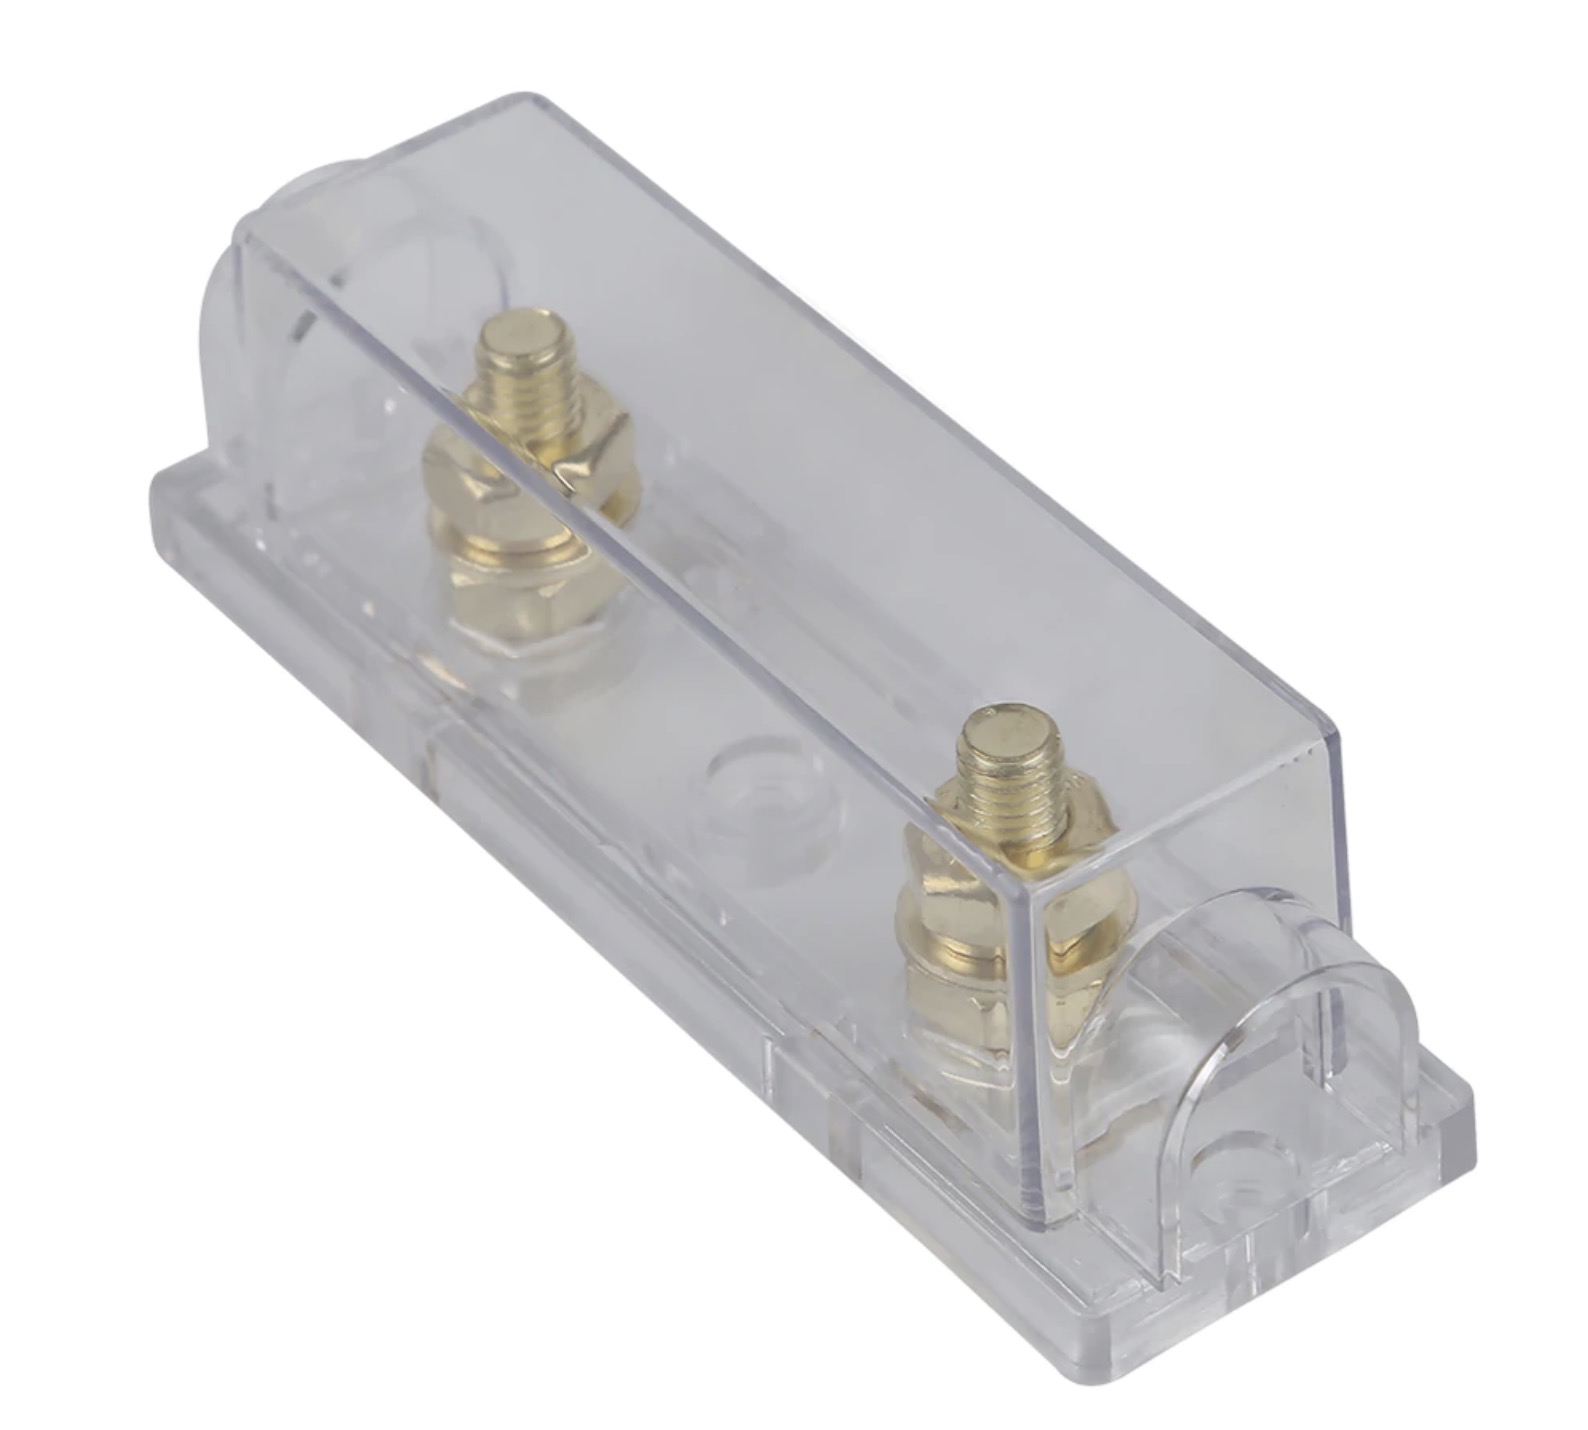 SMICO ANL Fuse Holder with 40A Fuse